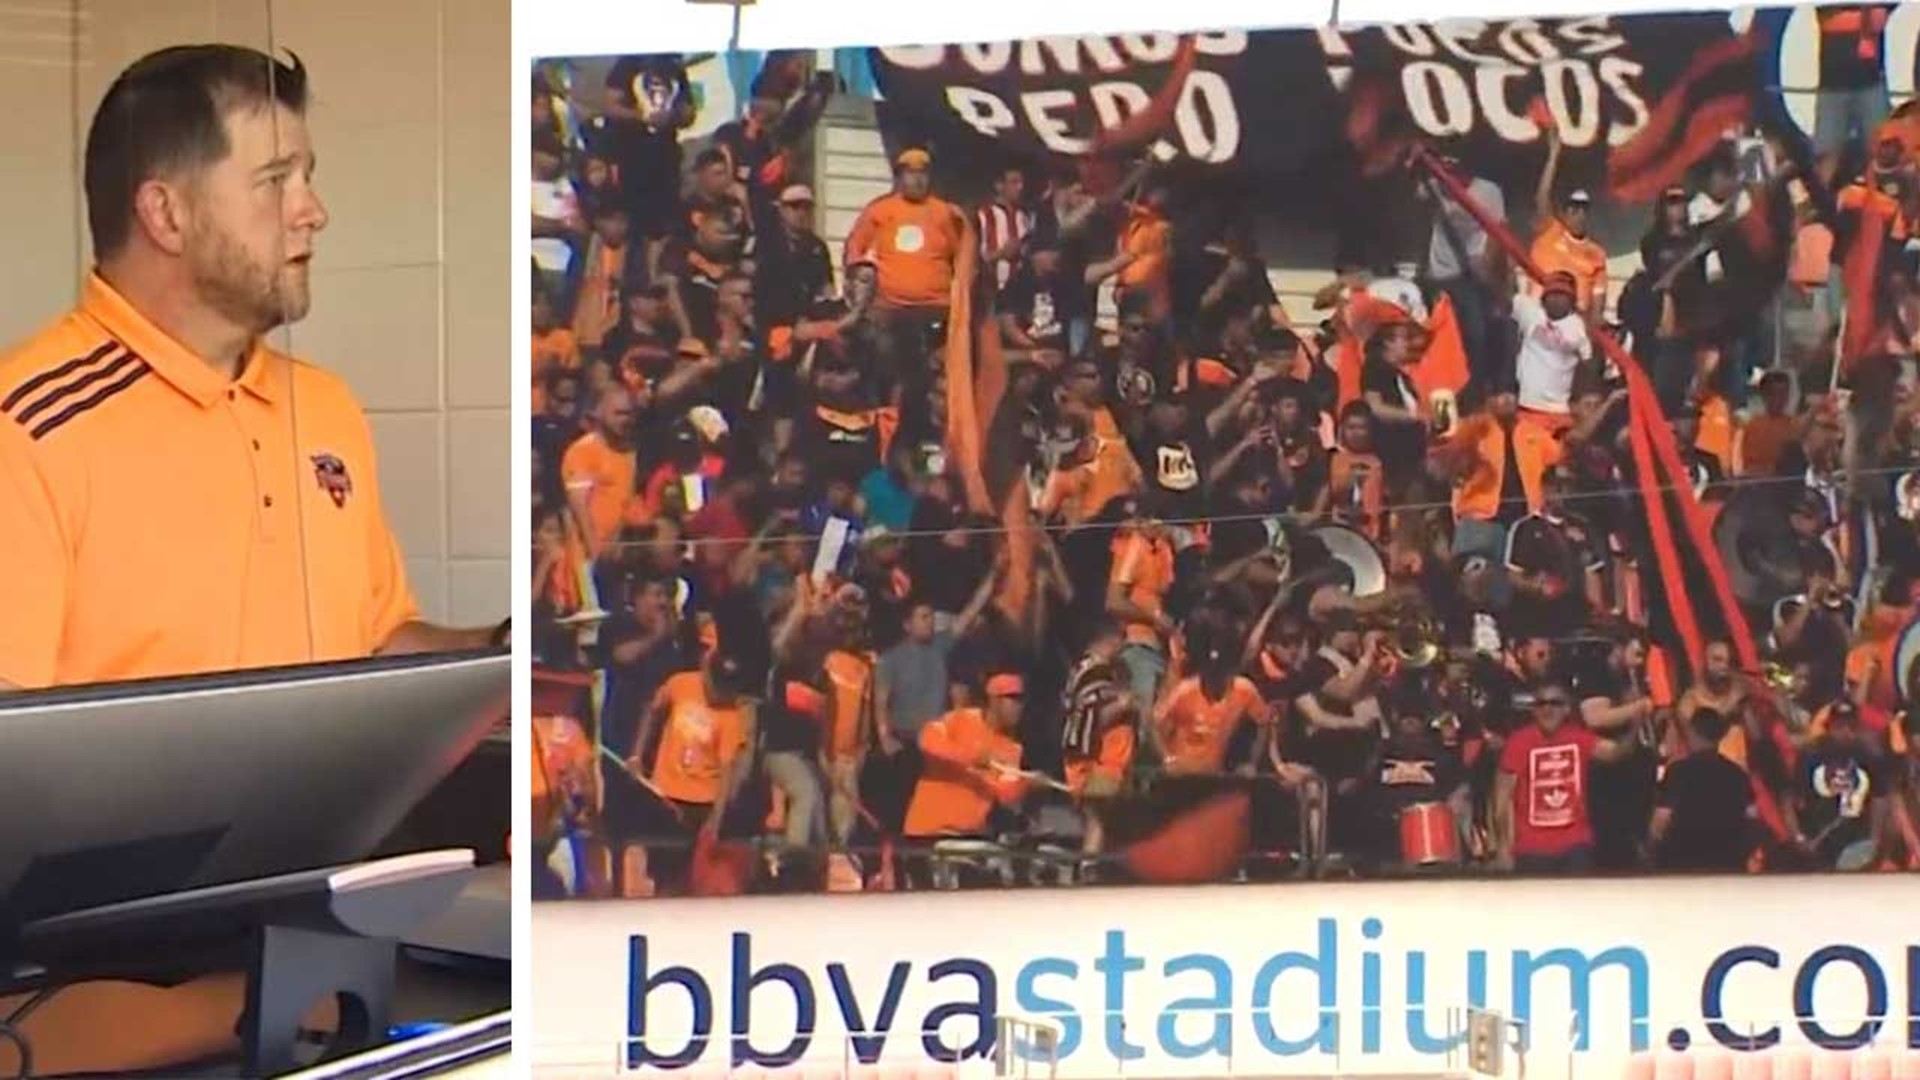 The Houston Dynamo won't play in front of fans, but they will still have fan support and that home field advantage.